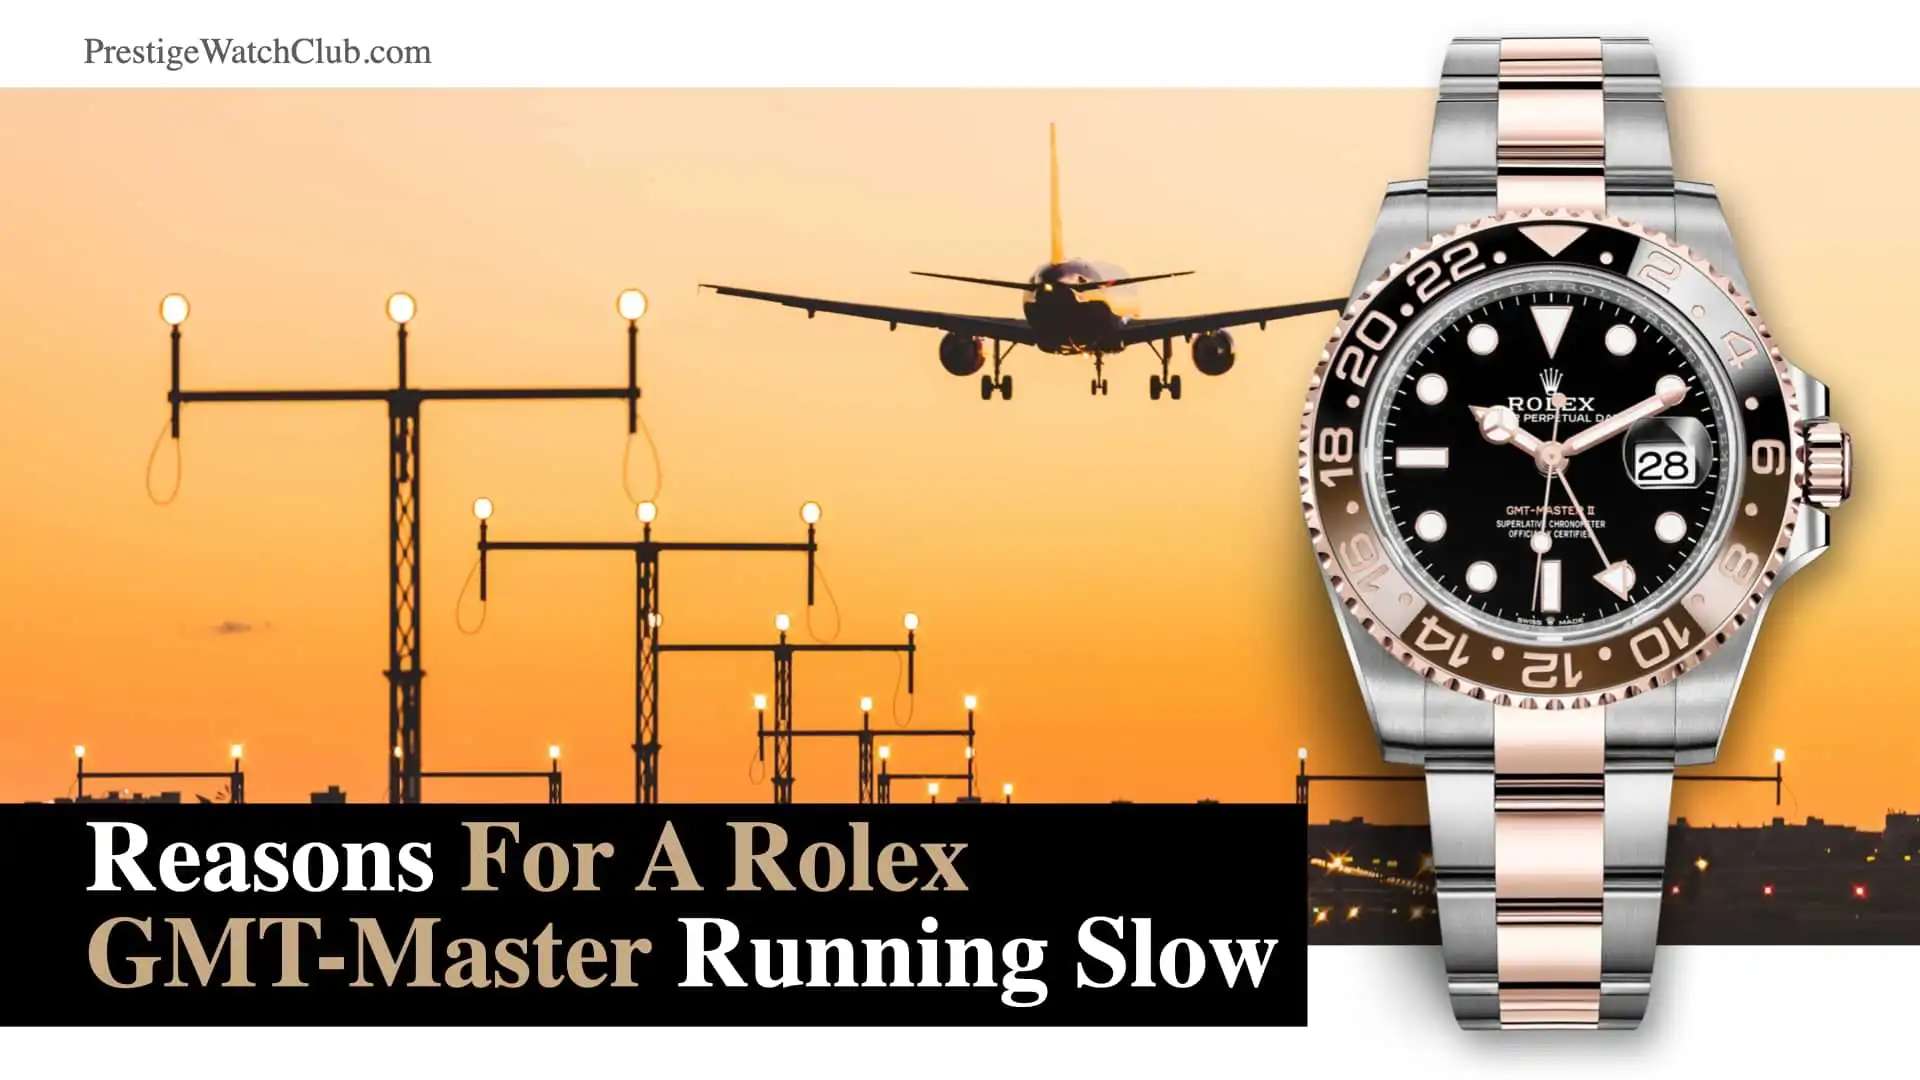 Reasons A Rolex GMT-Master Running Slow